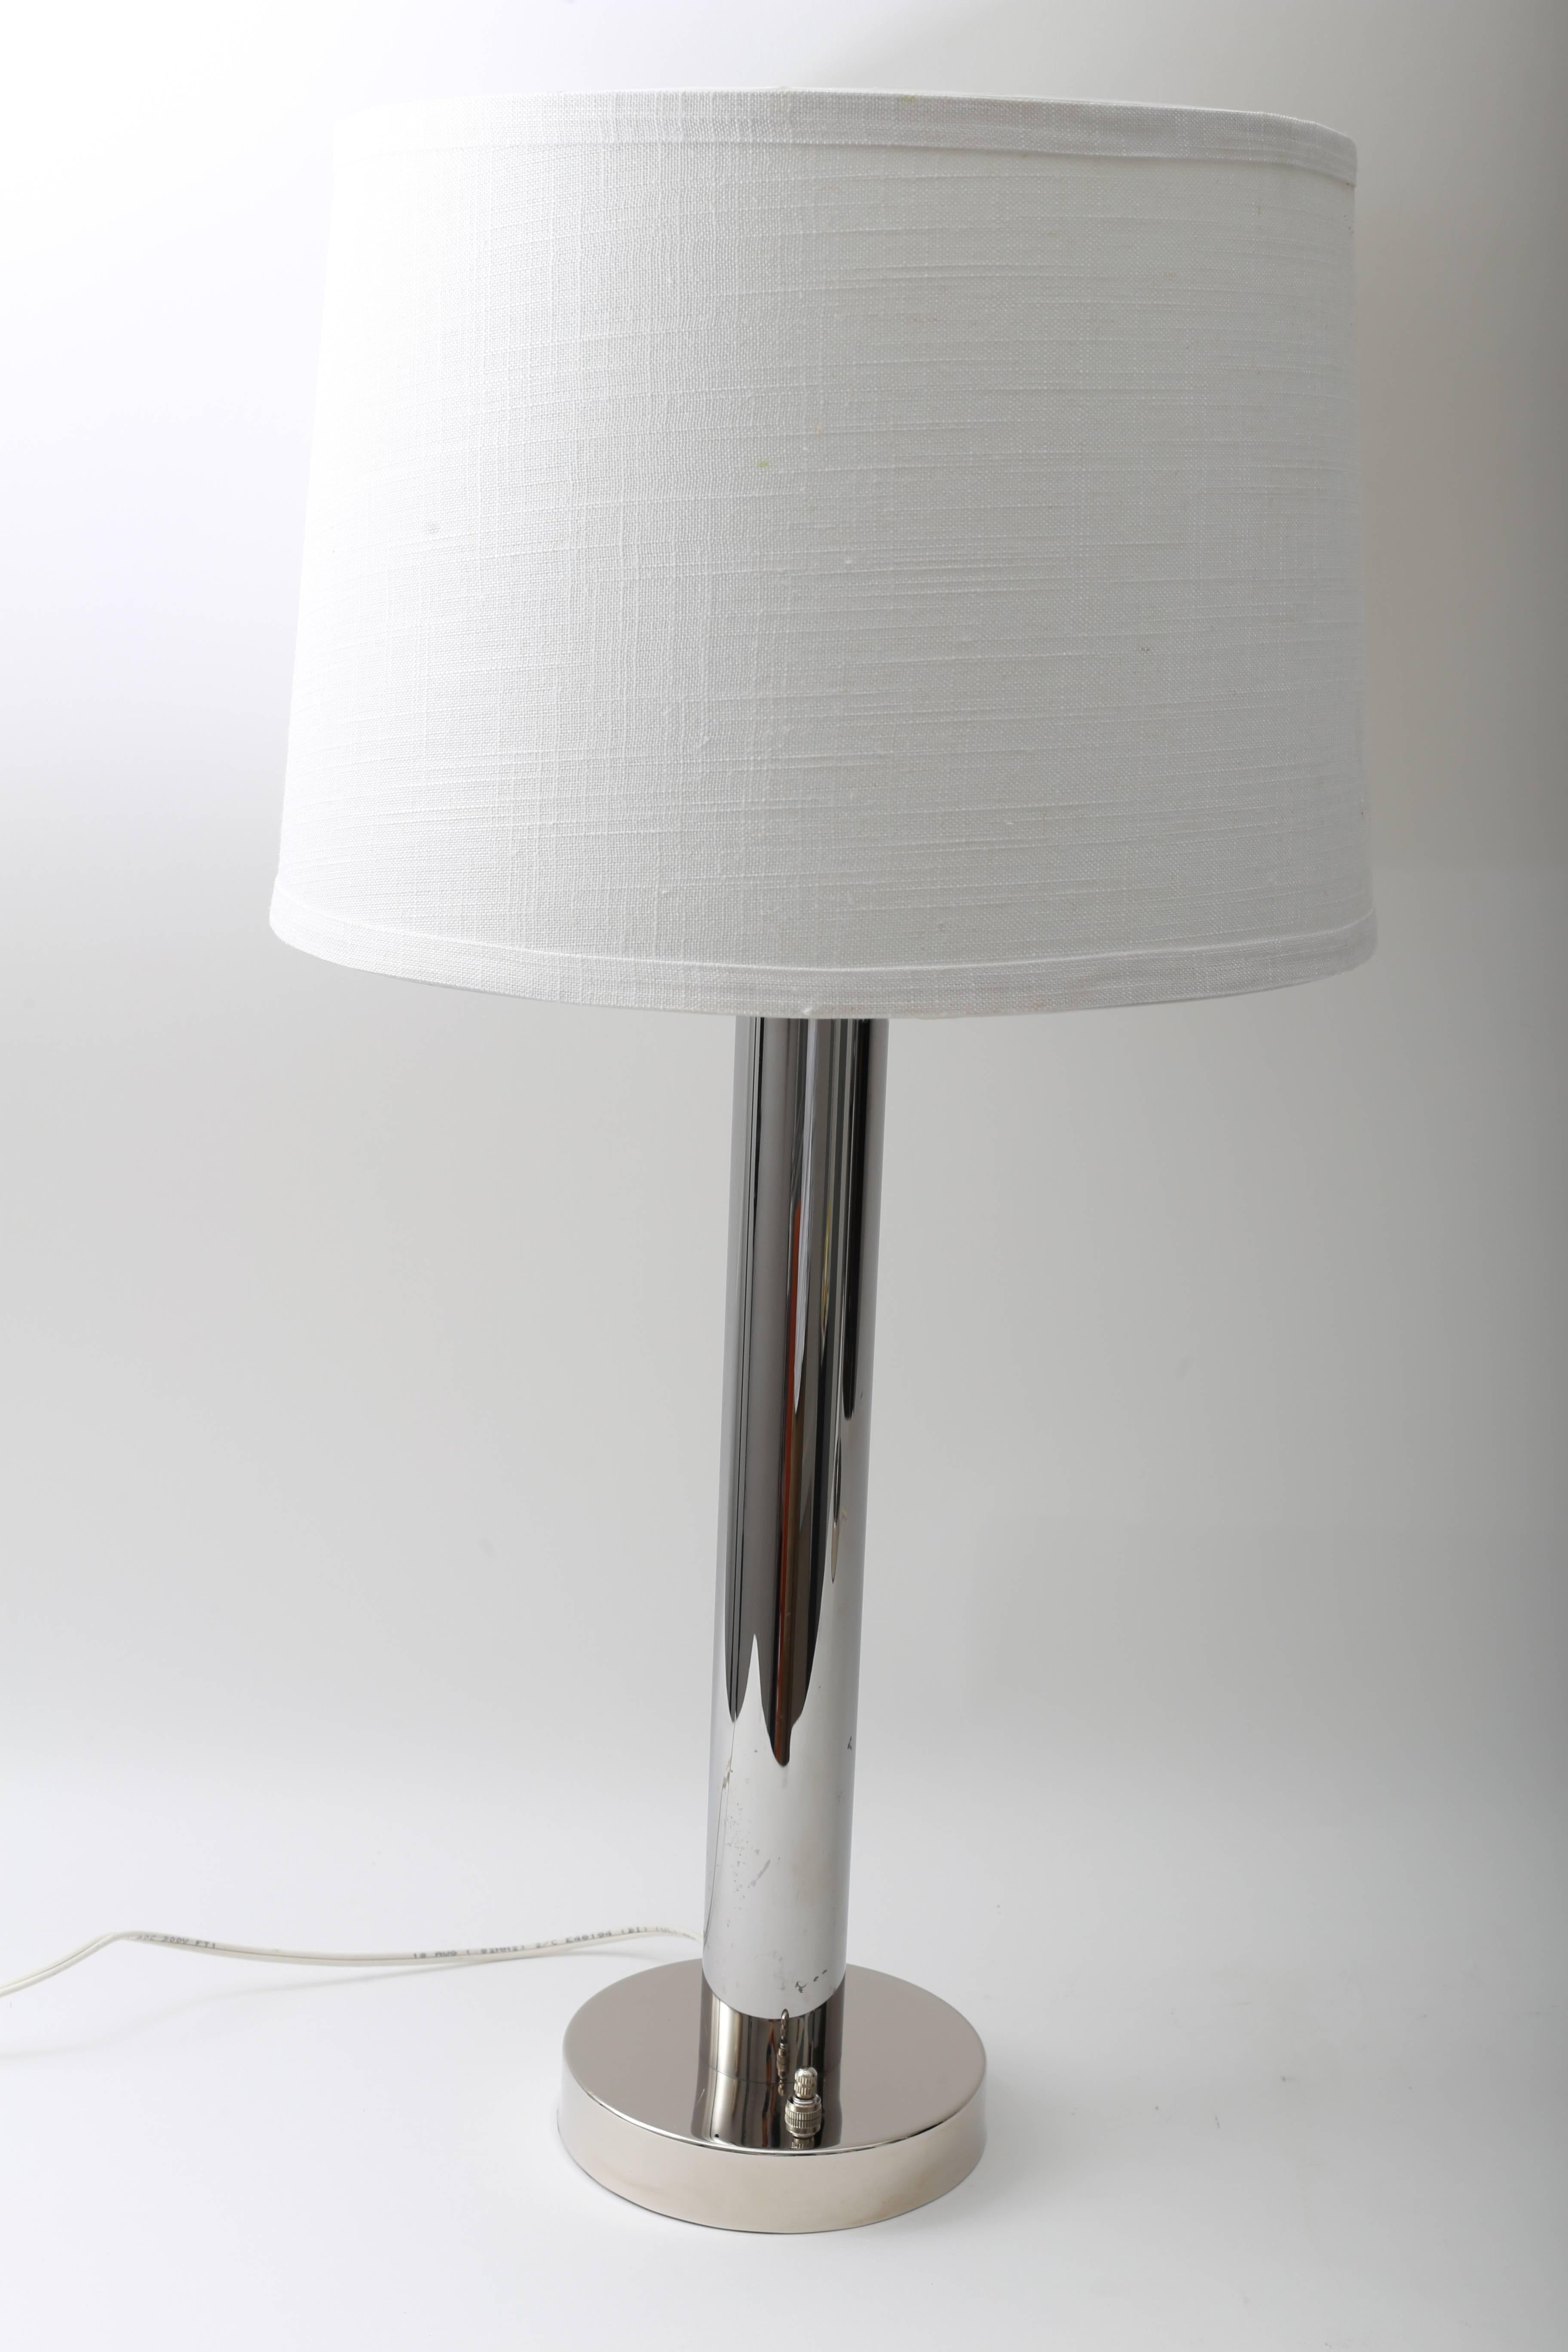 20th Century Pair of Polished Chrome Table Lamps